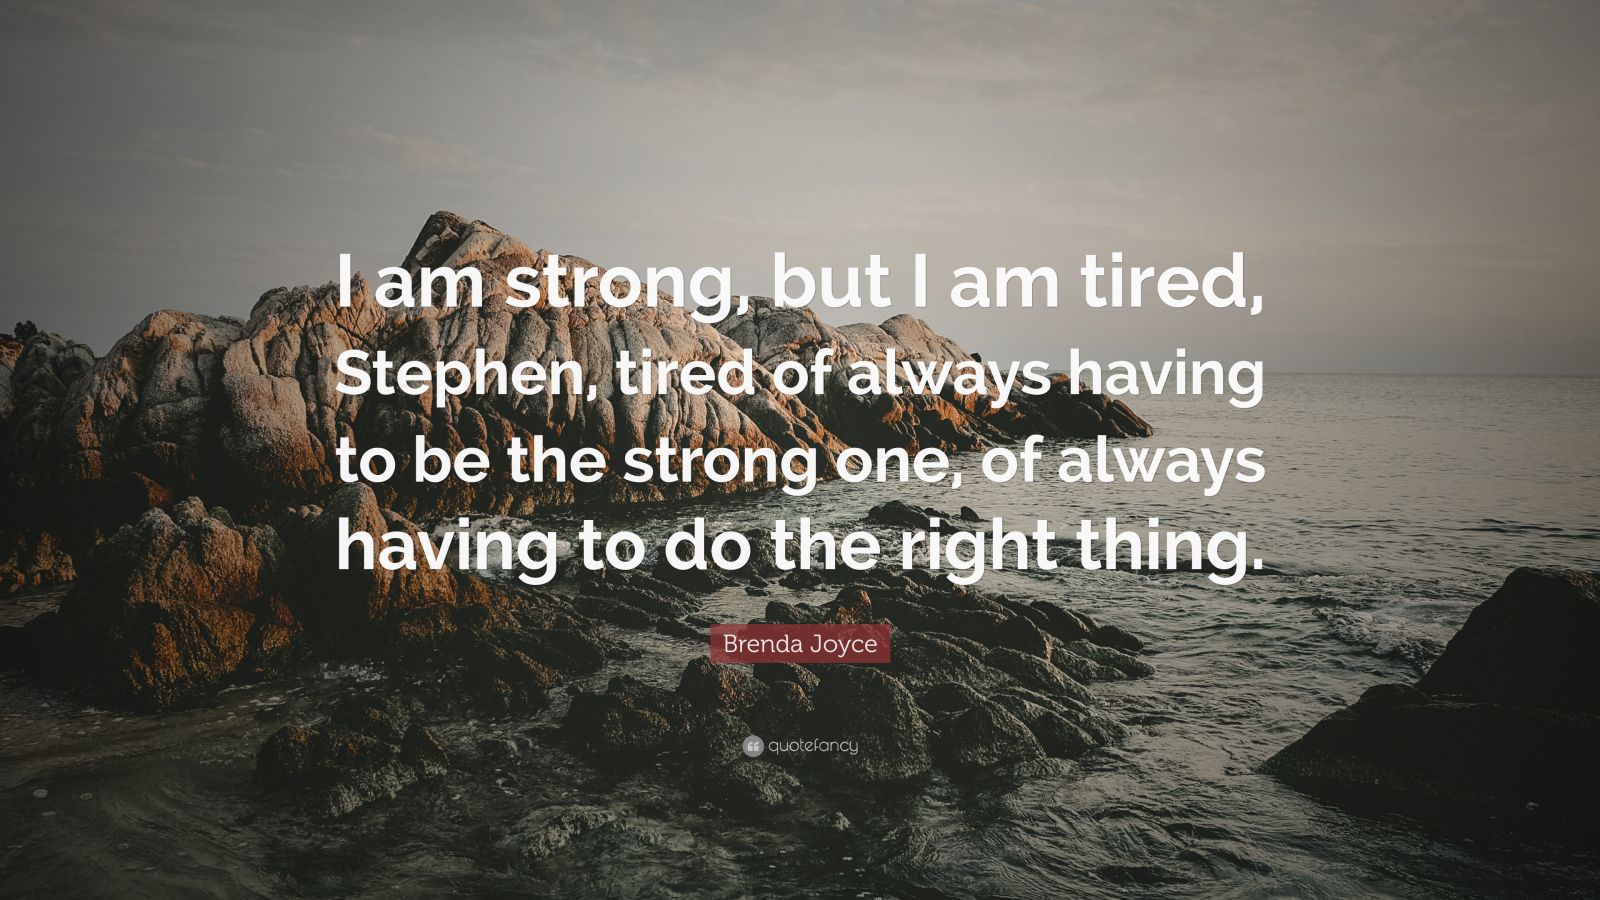 Brenda Joyce Quote: “I am strong, but I am tired, Stephen, tired of